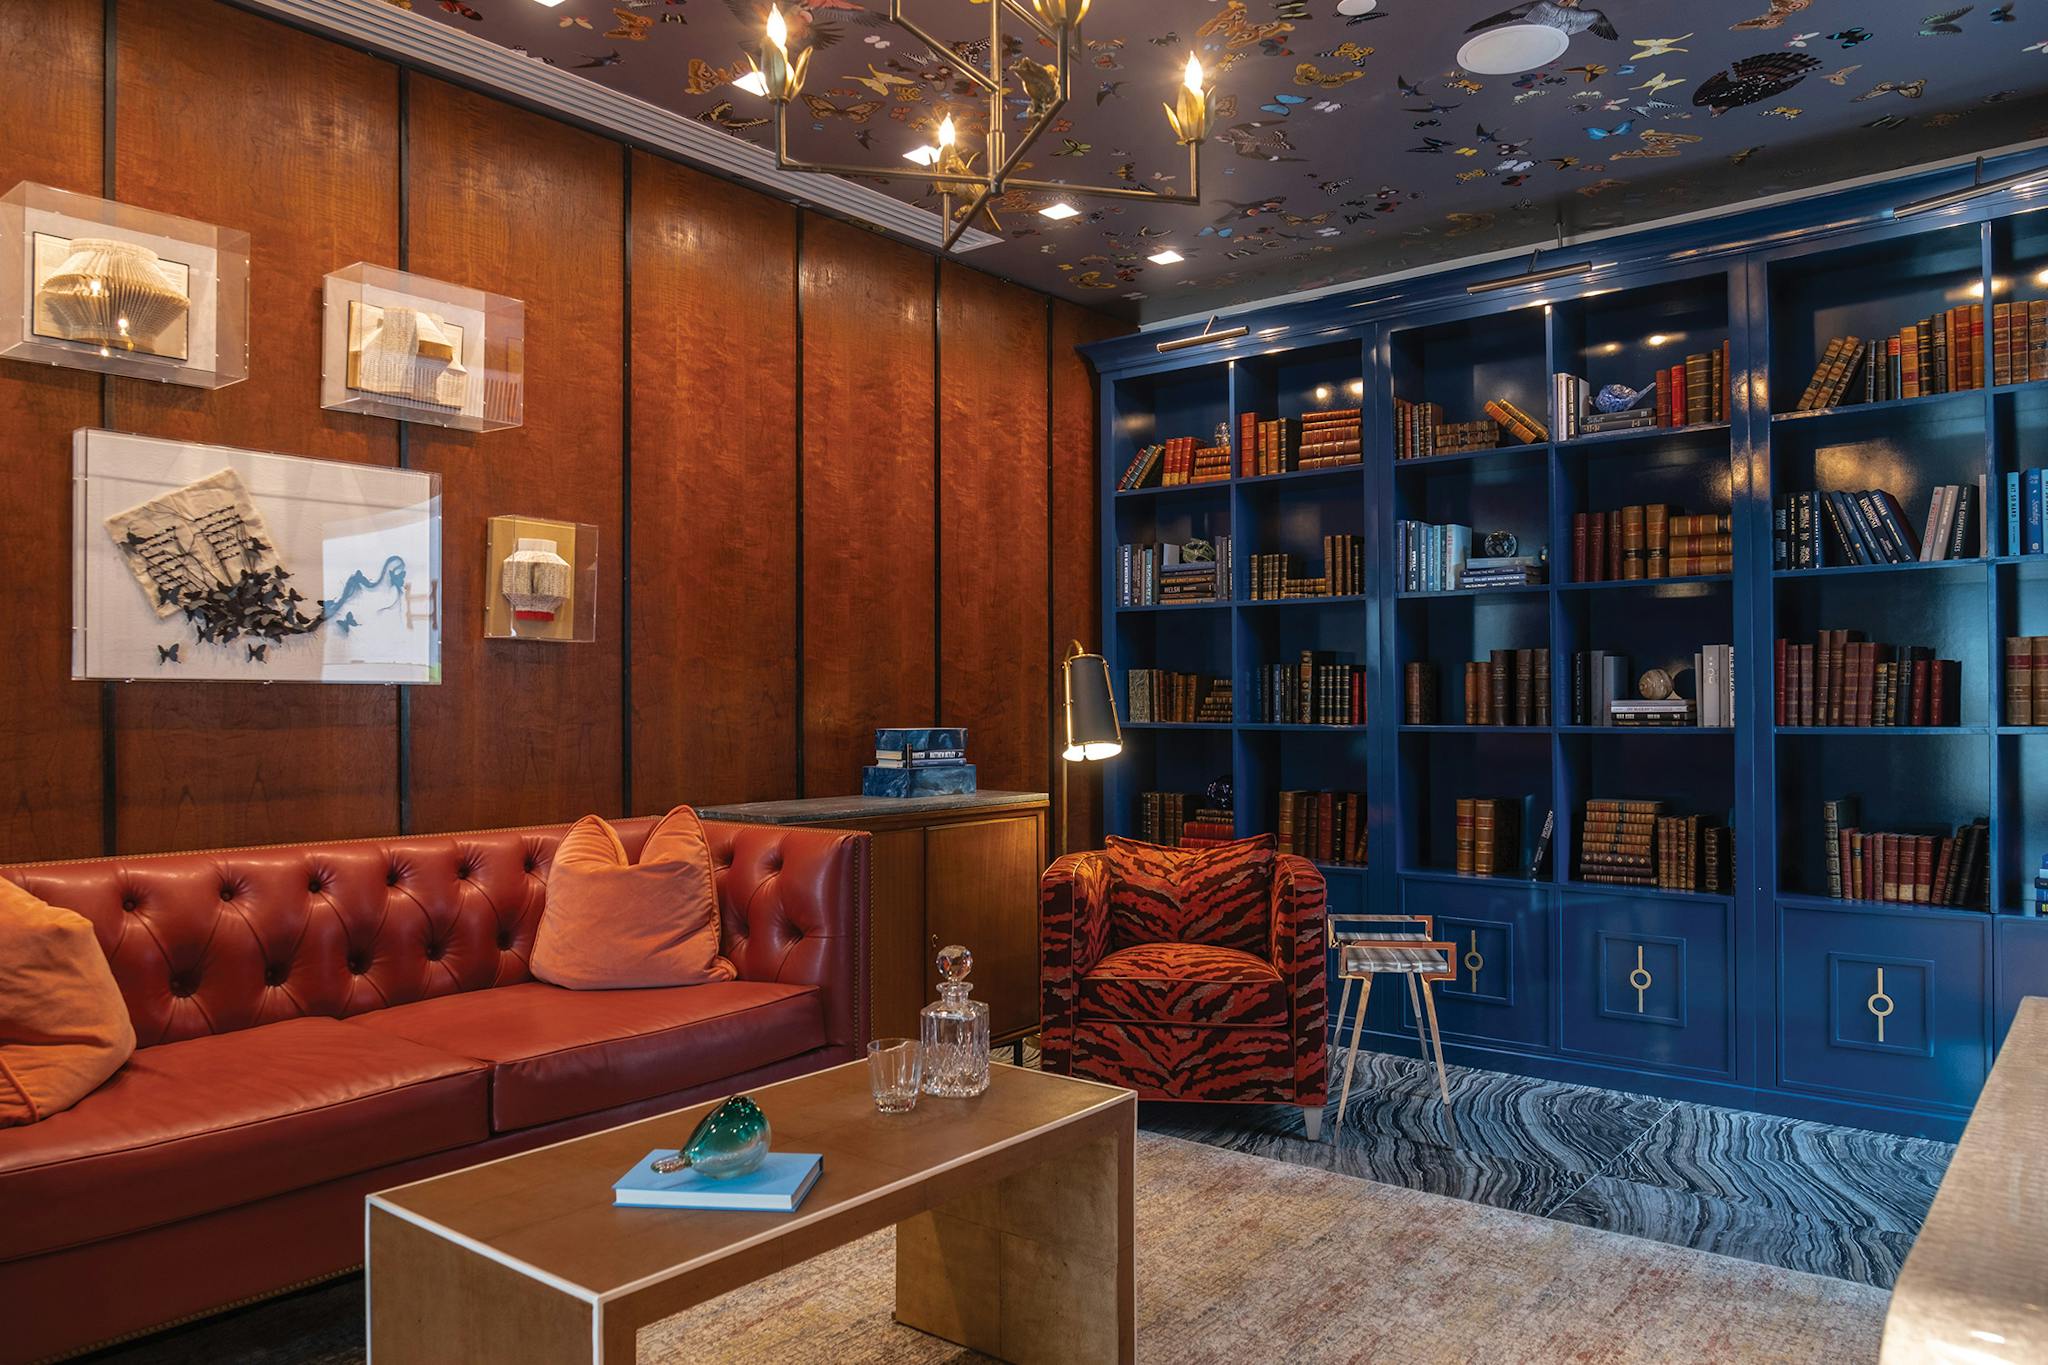 The Thompson Hotel's library lounge with a brown leather couch and full bookcase.